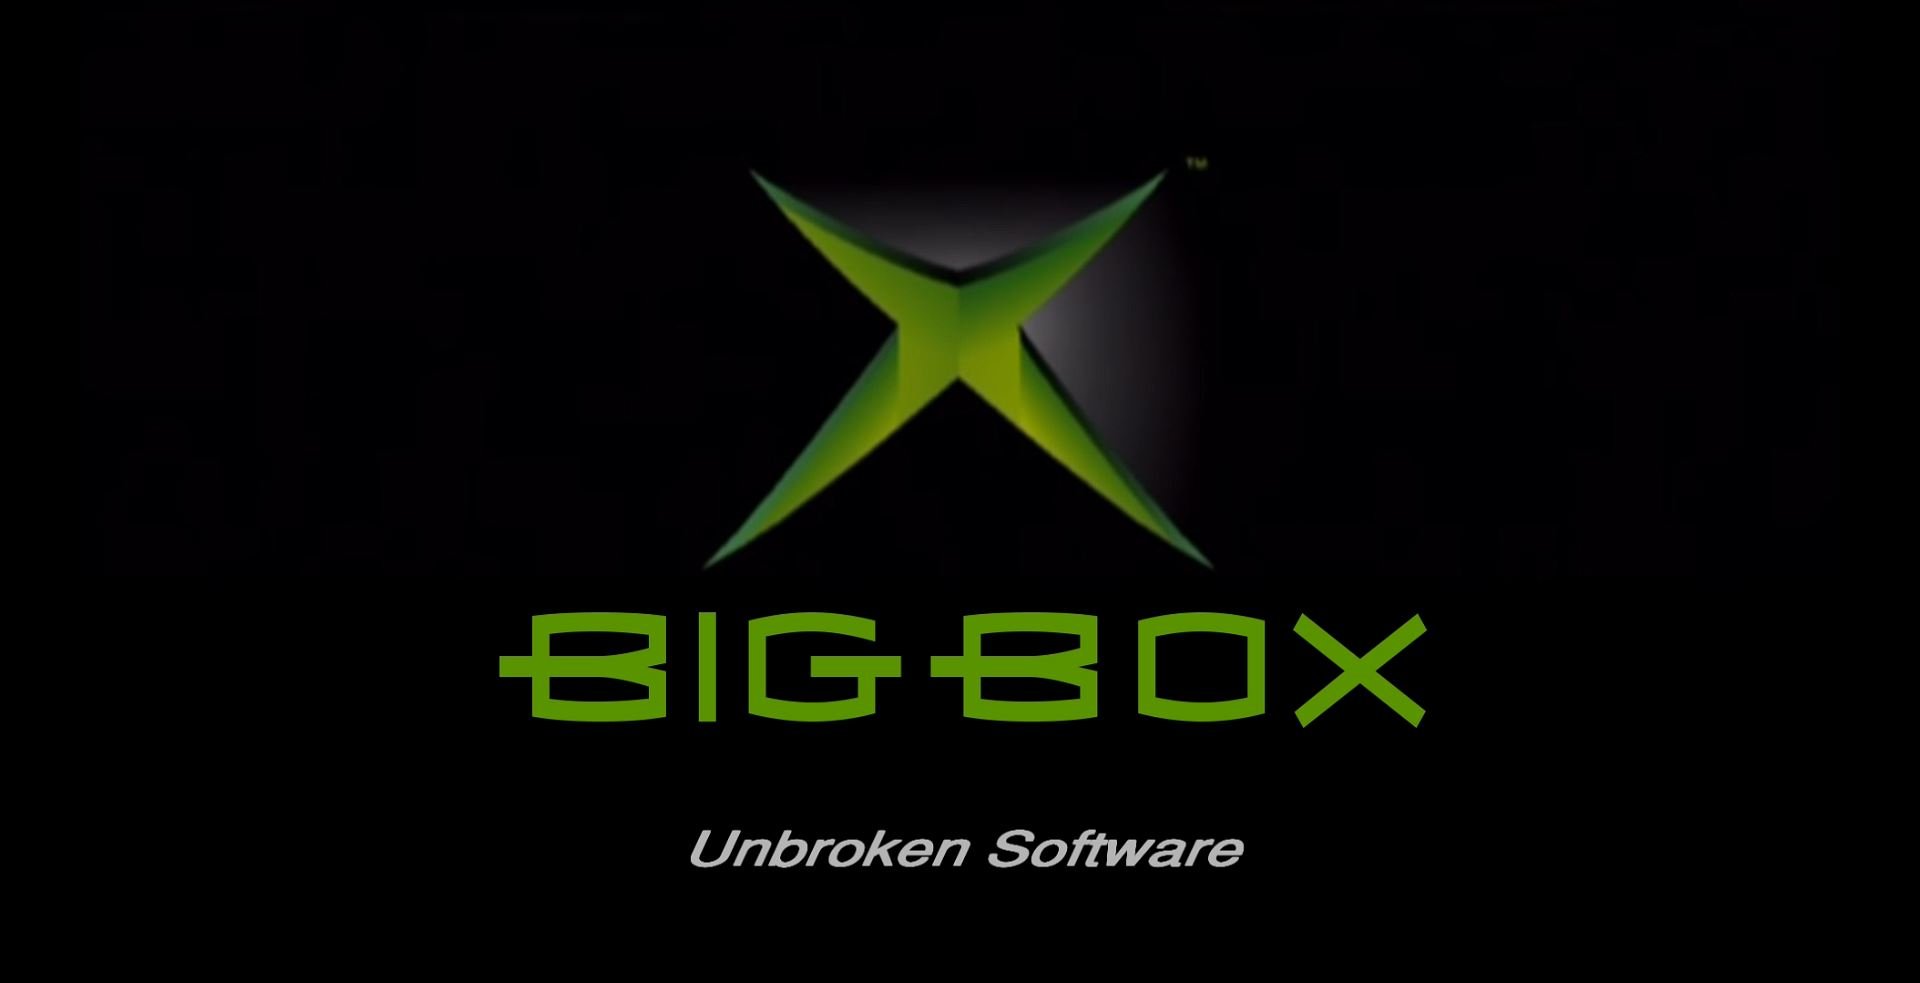 More information about "XBig Box Startup"